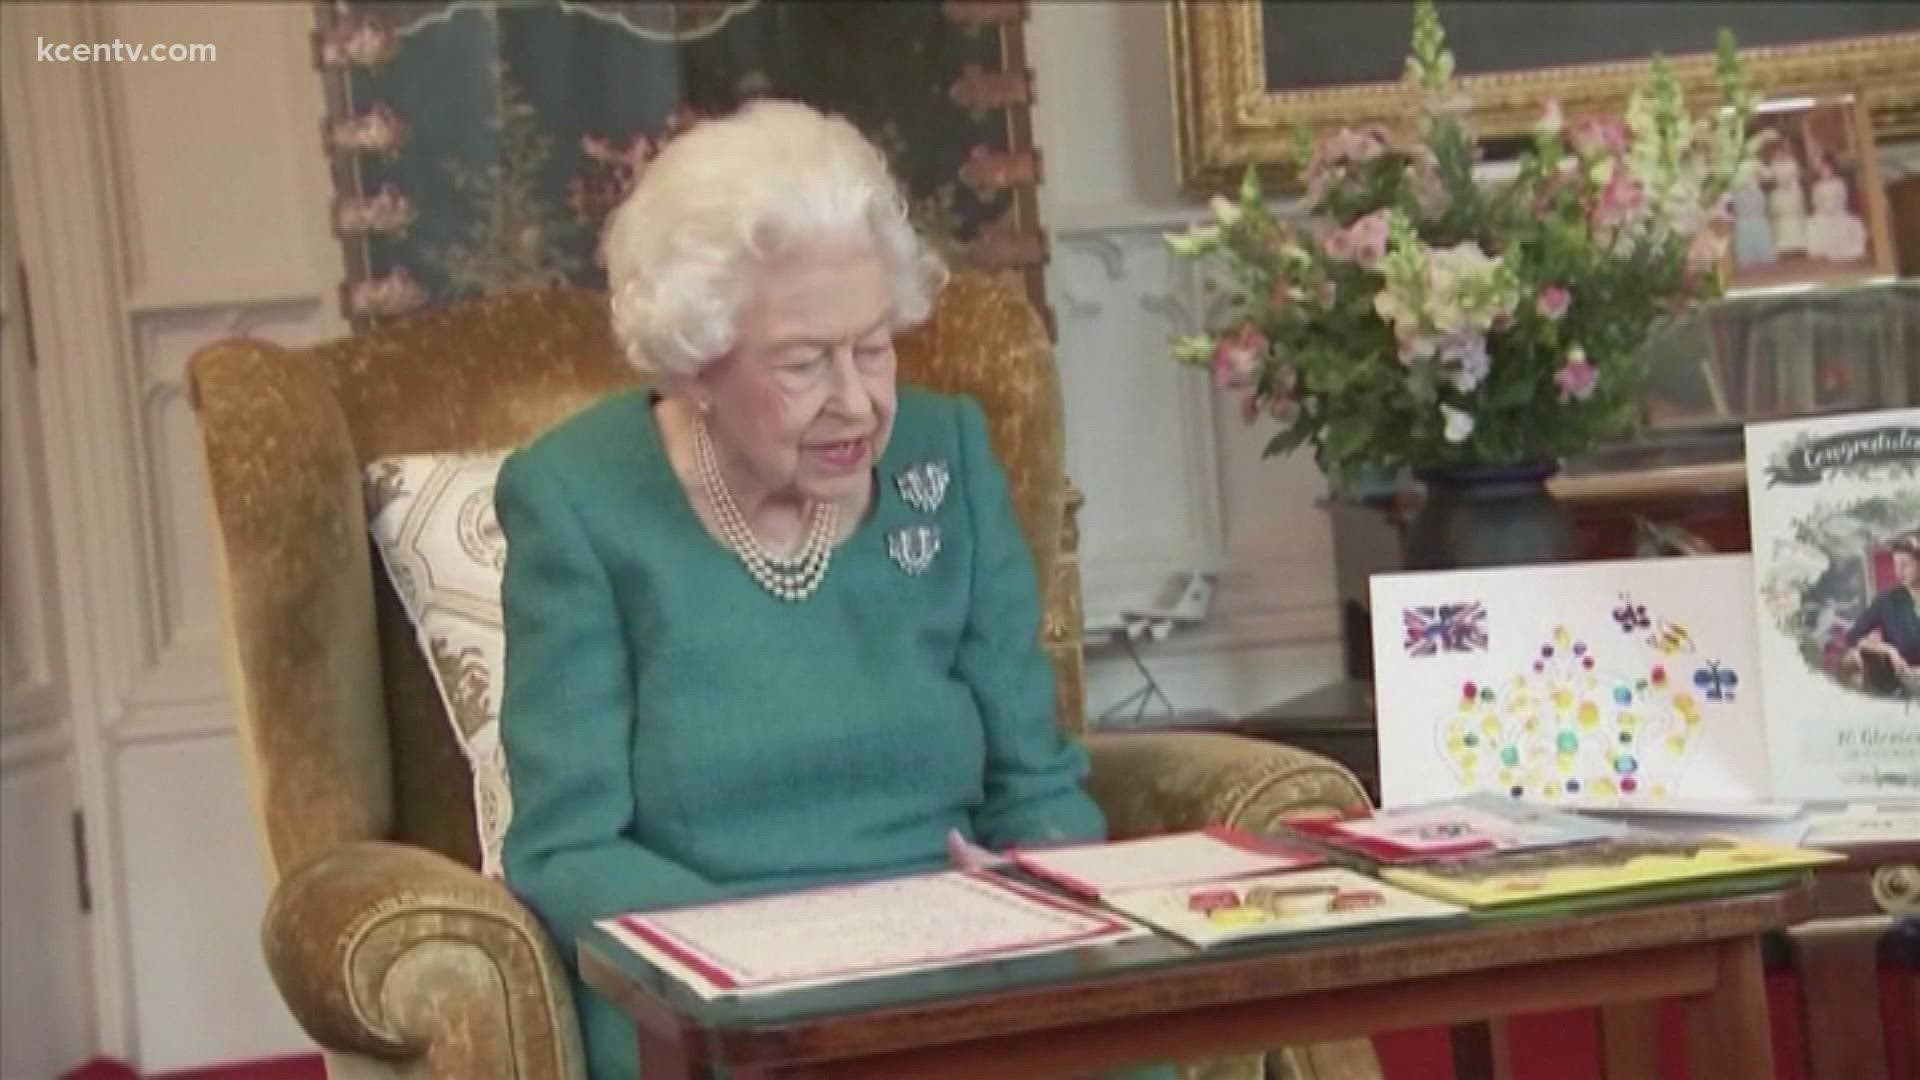 According to Buckingham Palace, the queen is experiencing flu-like symptoms.